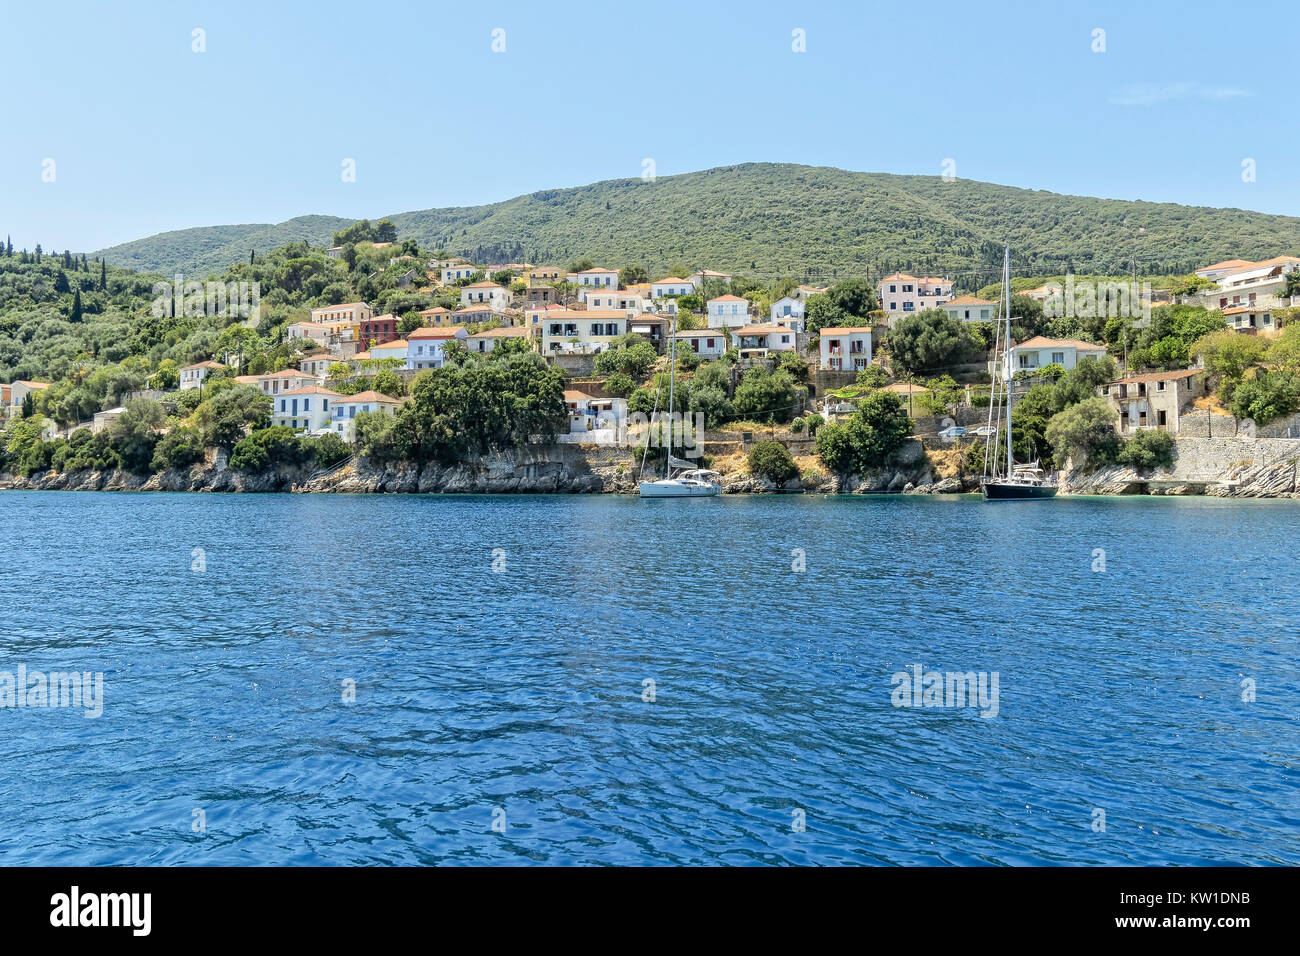 On the shores of the Greek island of Ithika white painted houses nestle among trees on the hillside while two yachts are moored close to the shore. Stock Photo